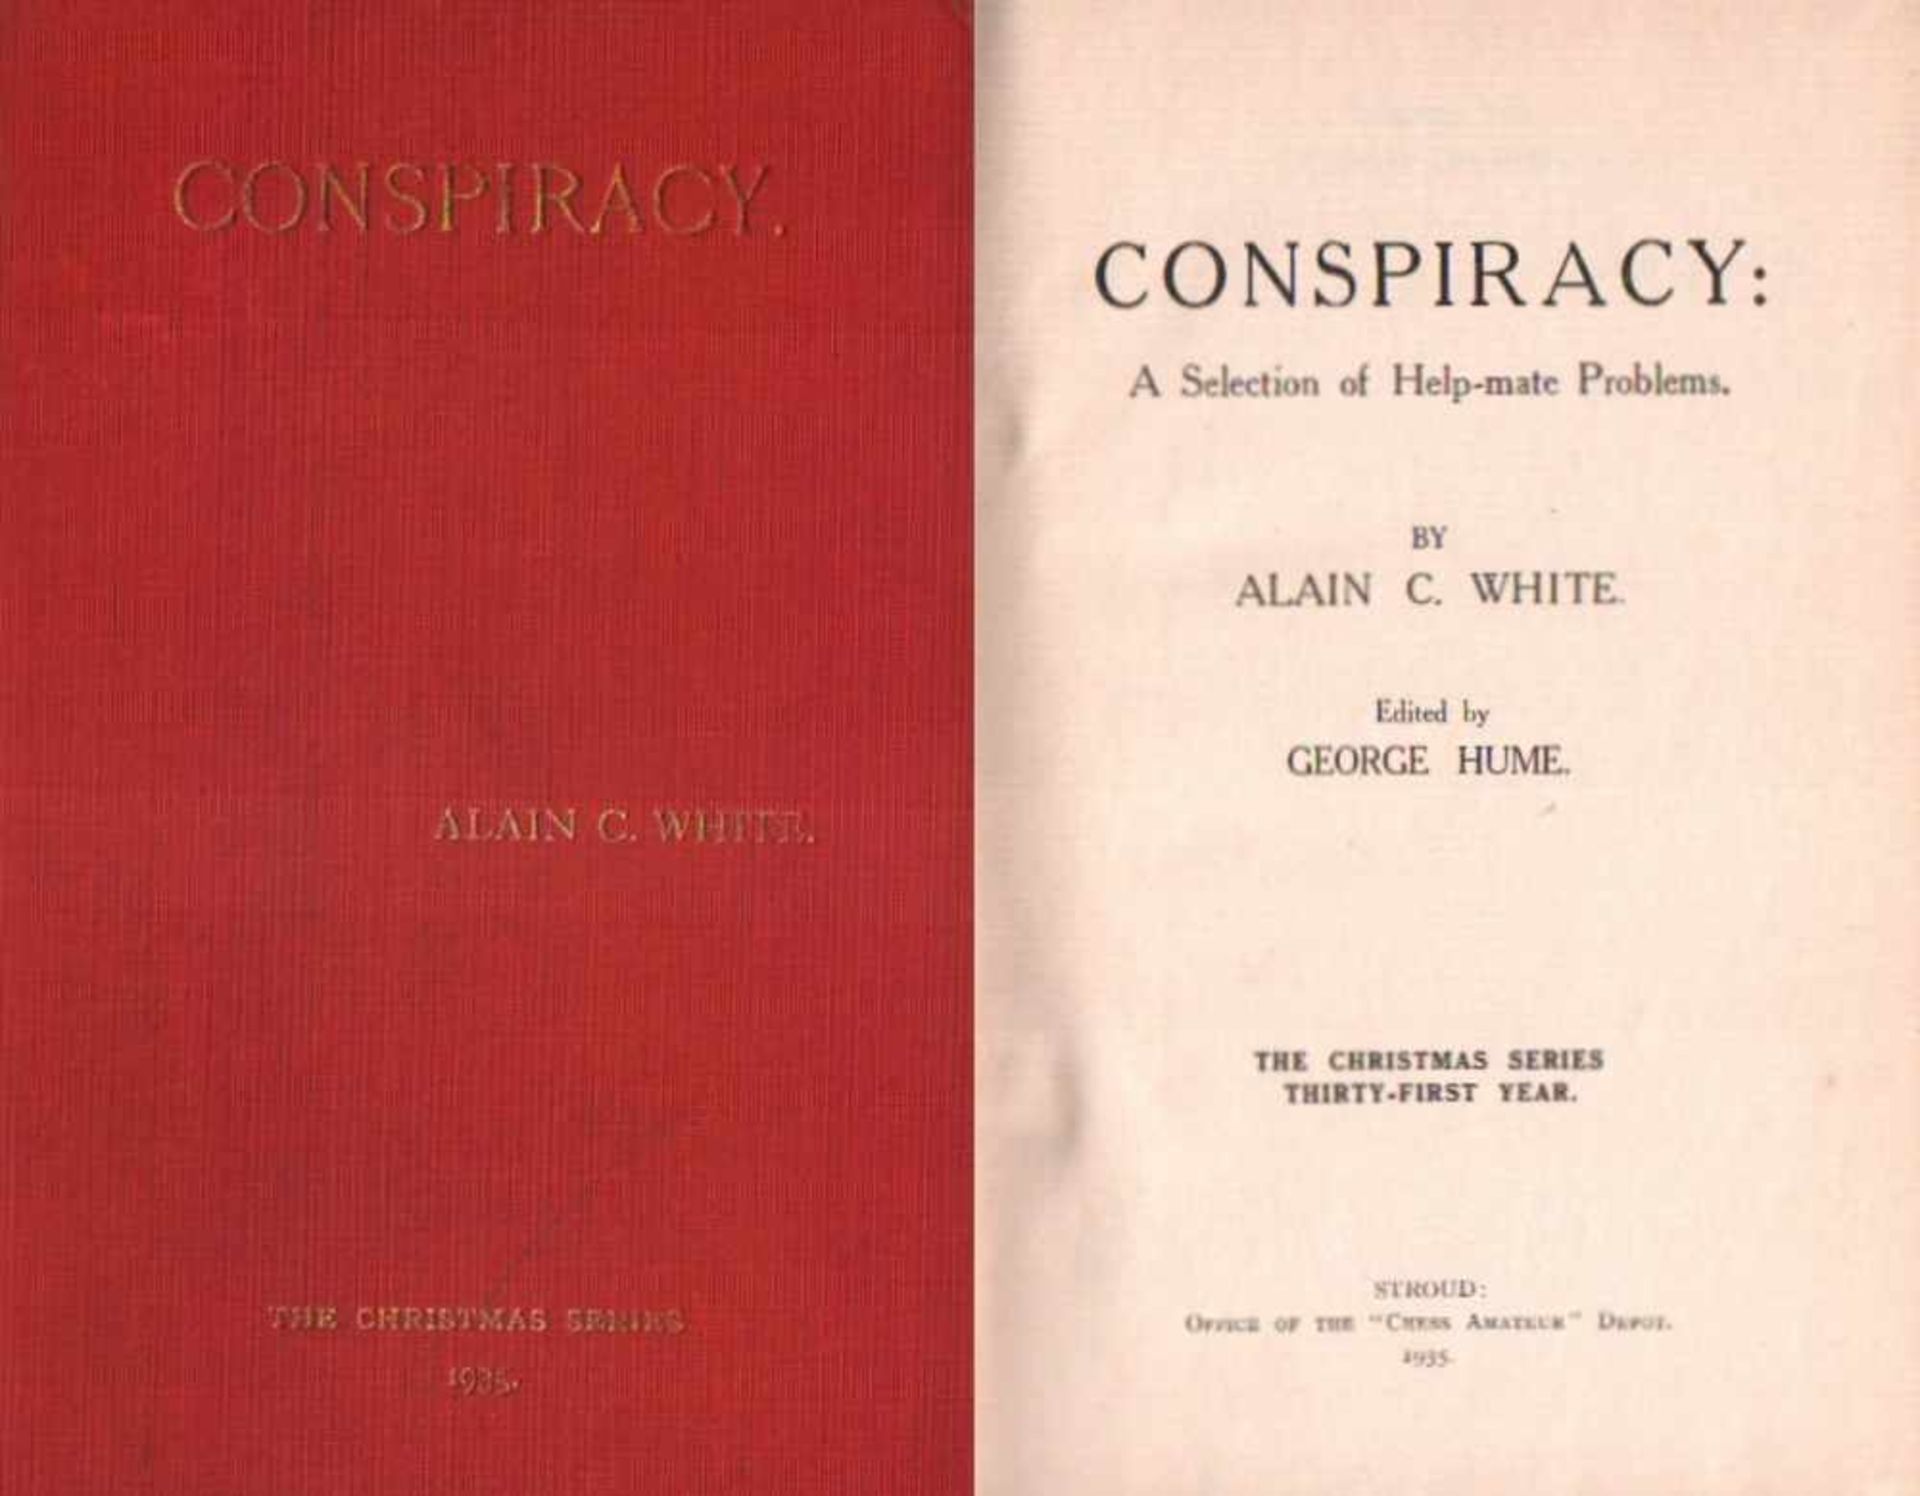 White, Alain C(ampbell).Conspiracy: A Selection of Help - mate Problems. Edited by George Hume.